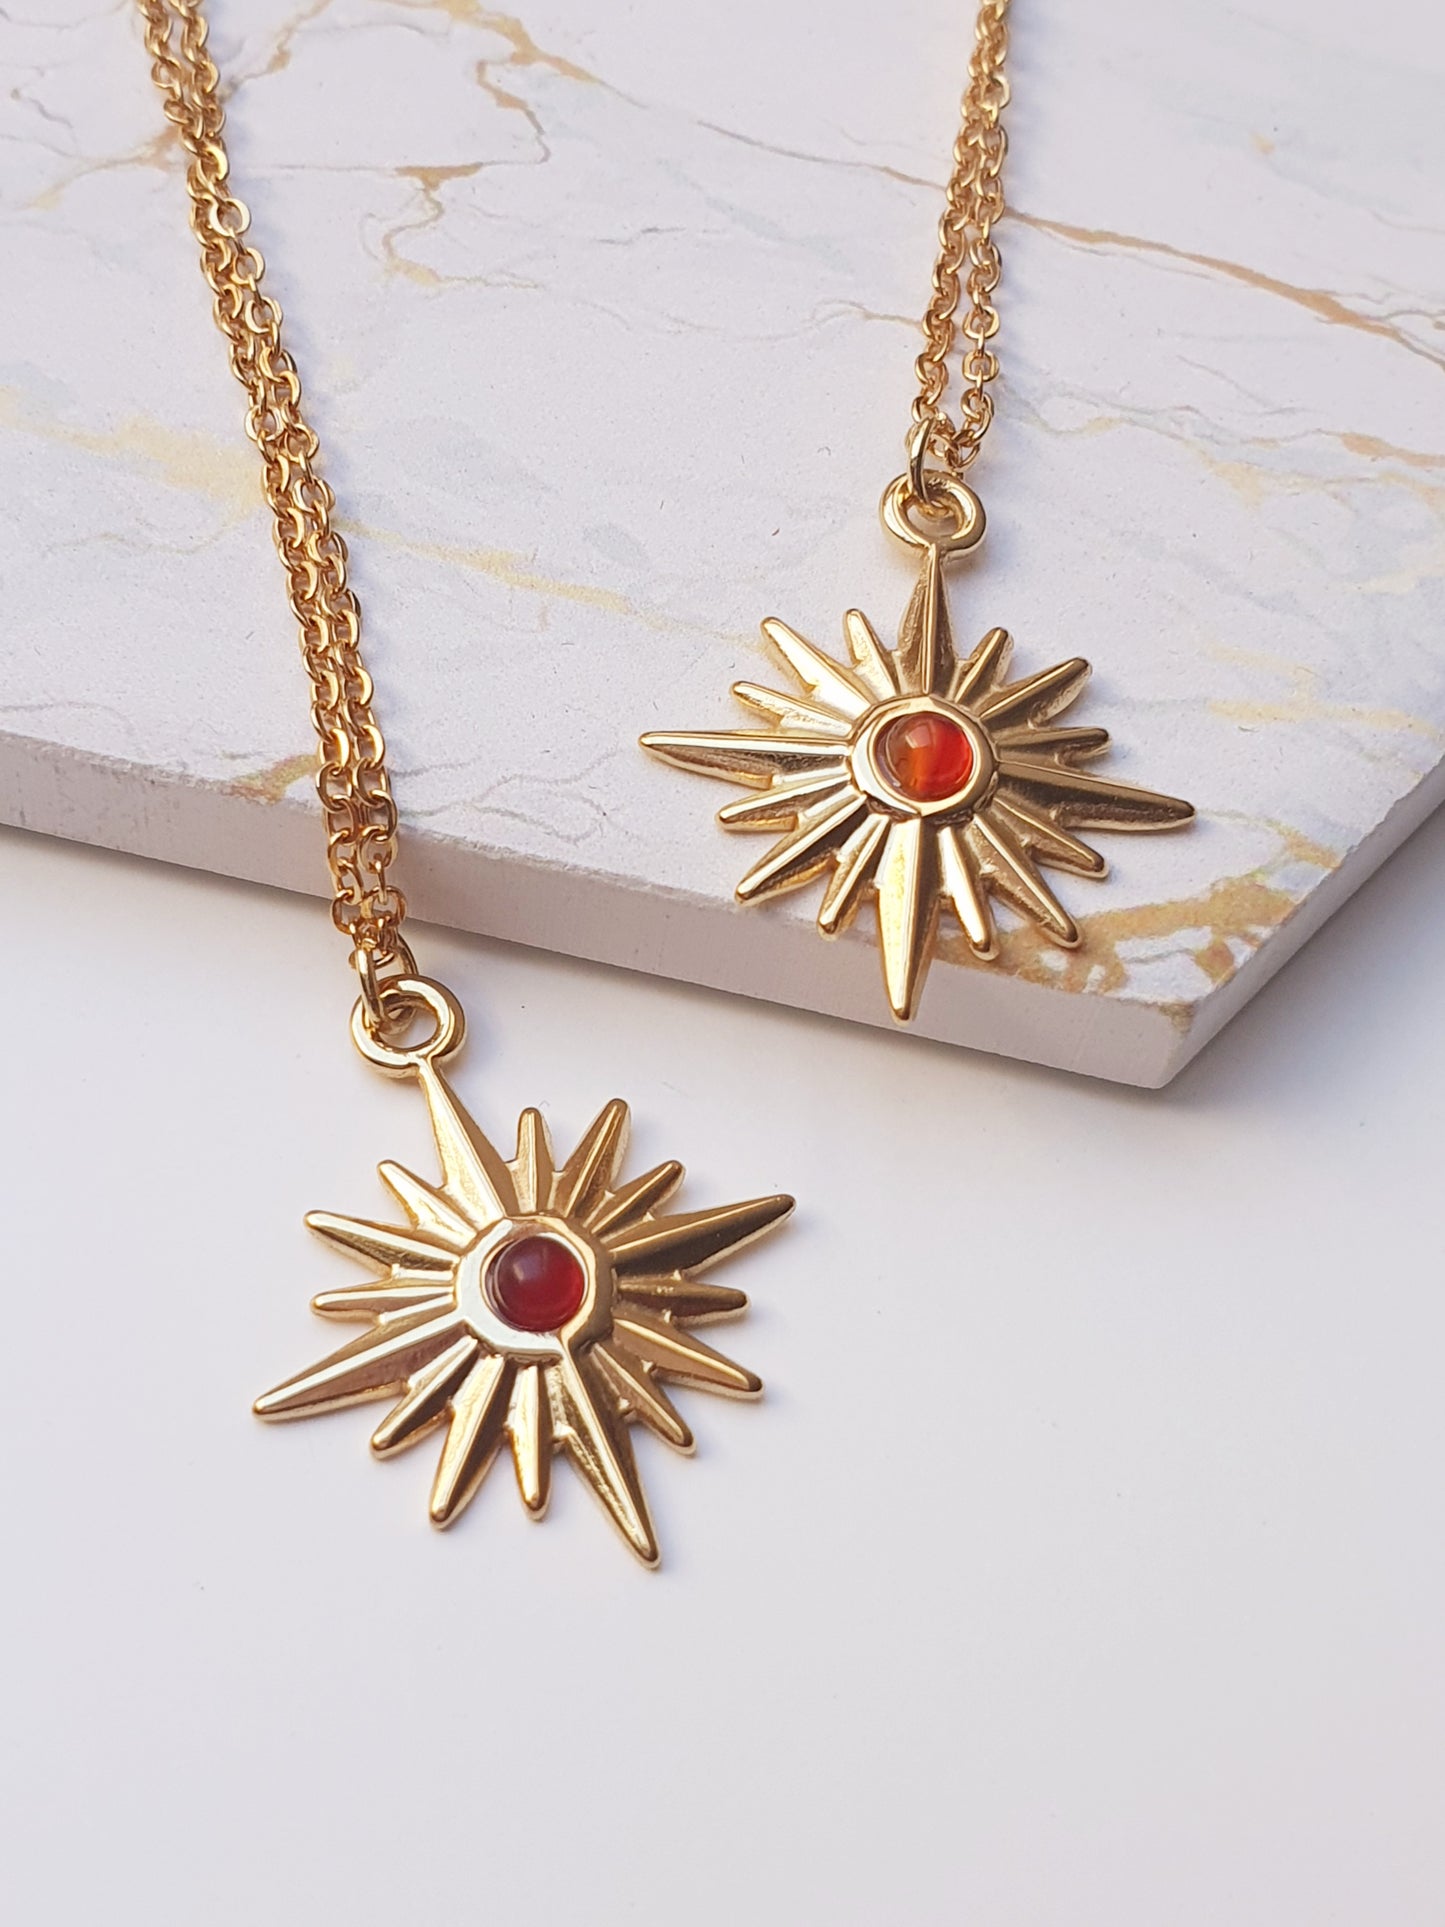 Two gold necklaces with star shaped pendants set in the middle with a small red gem rest on a coaster